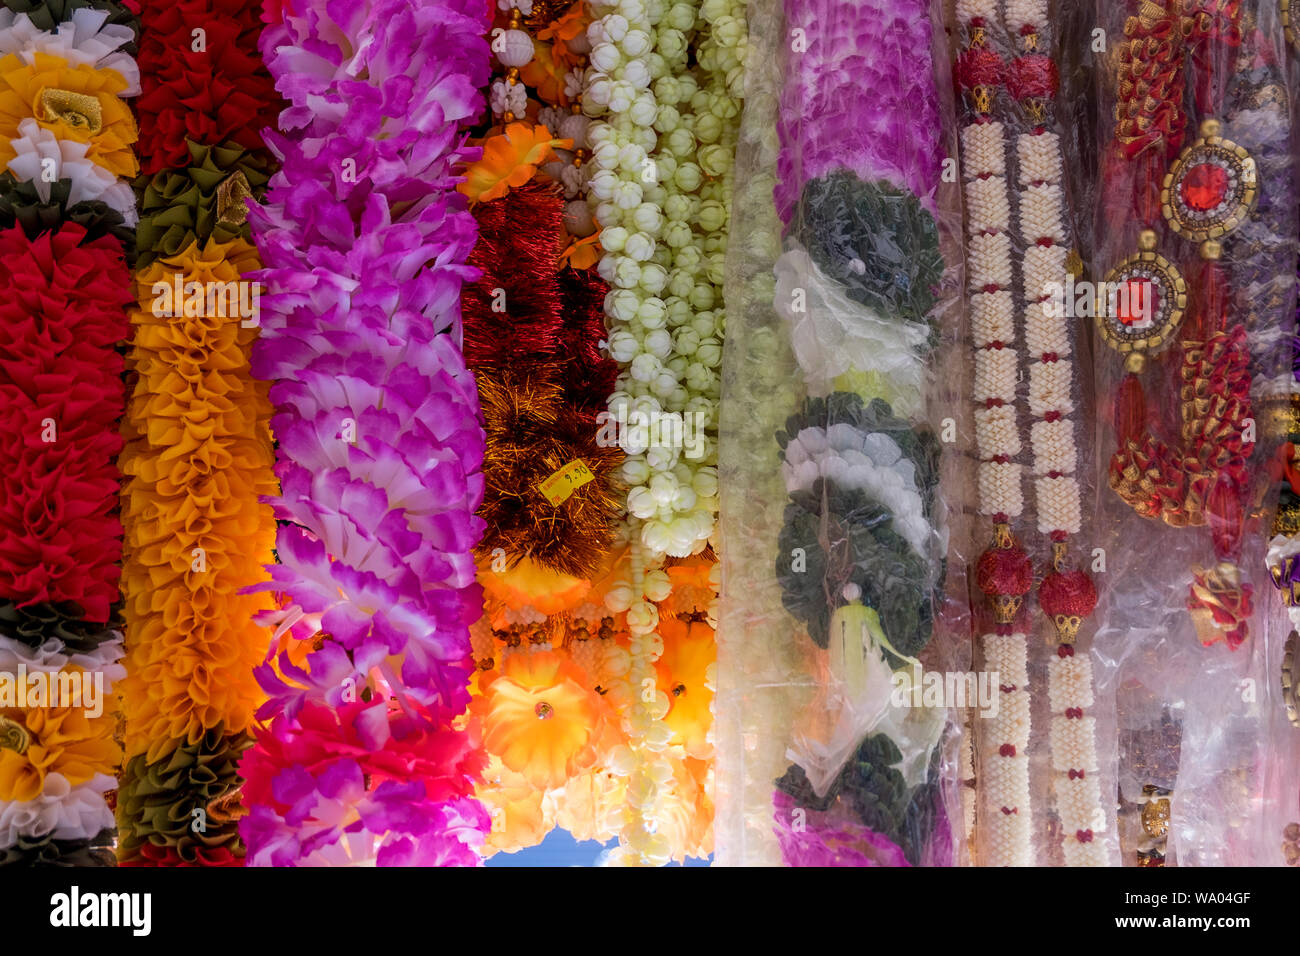 Plastic flower strands are for sale at an Indian Hindu religious items ...